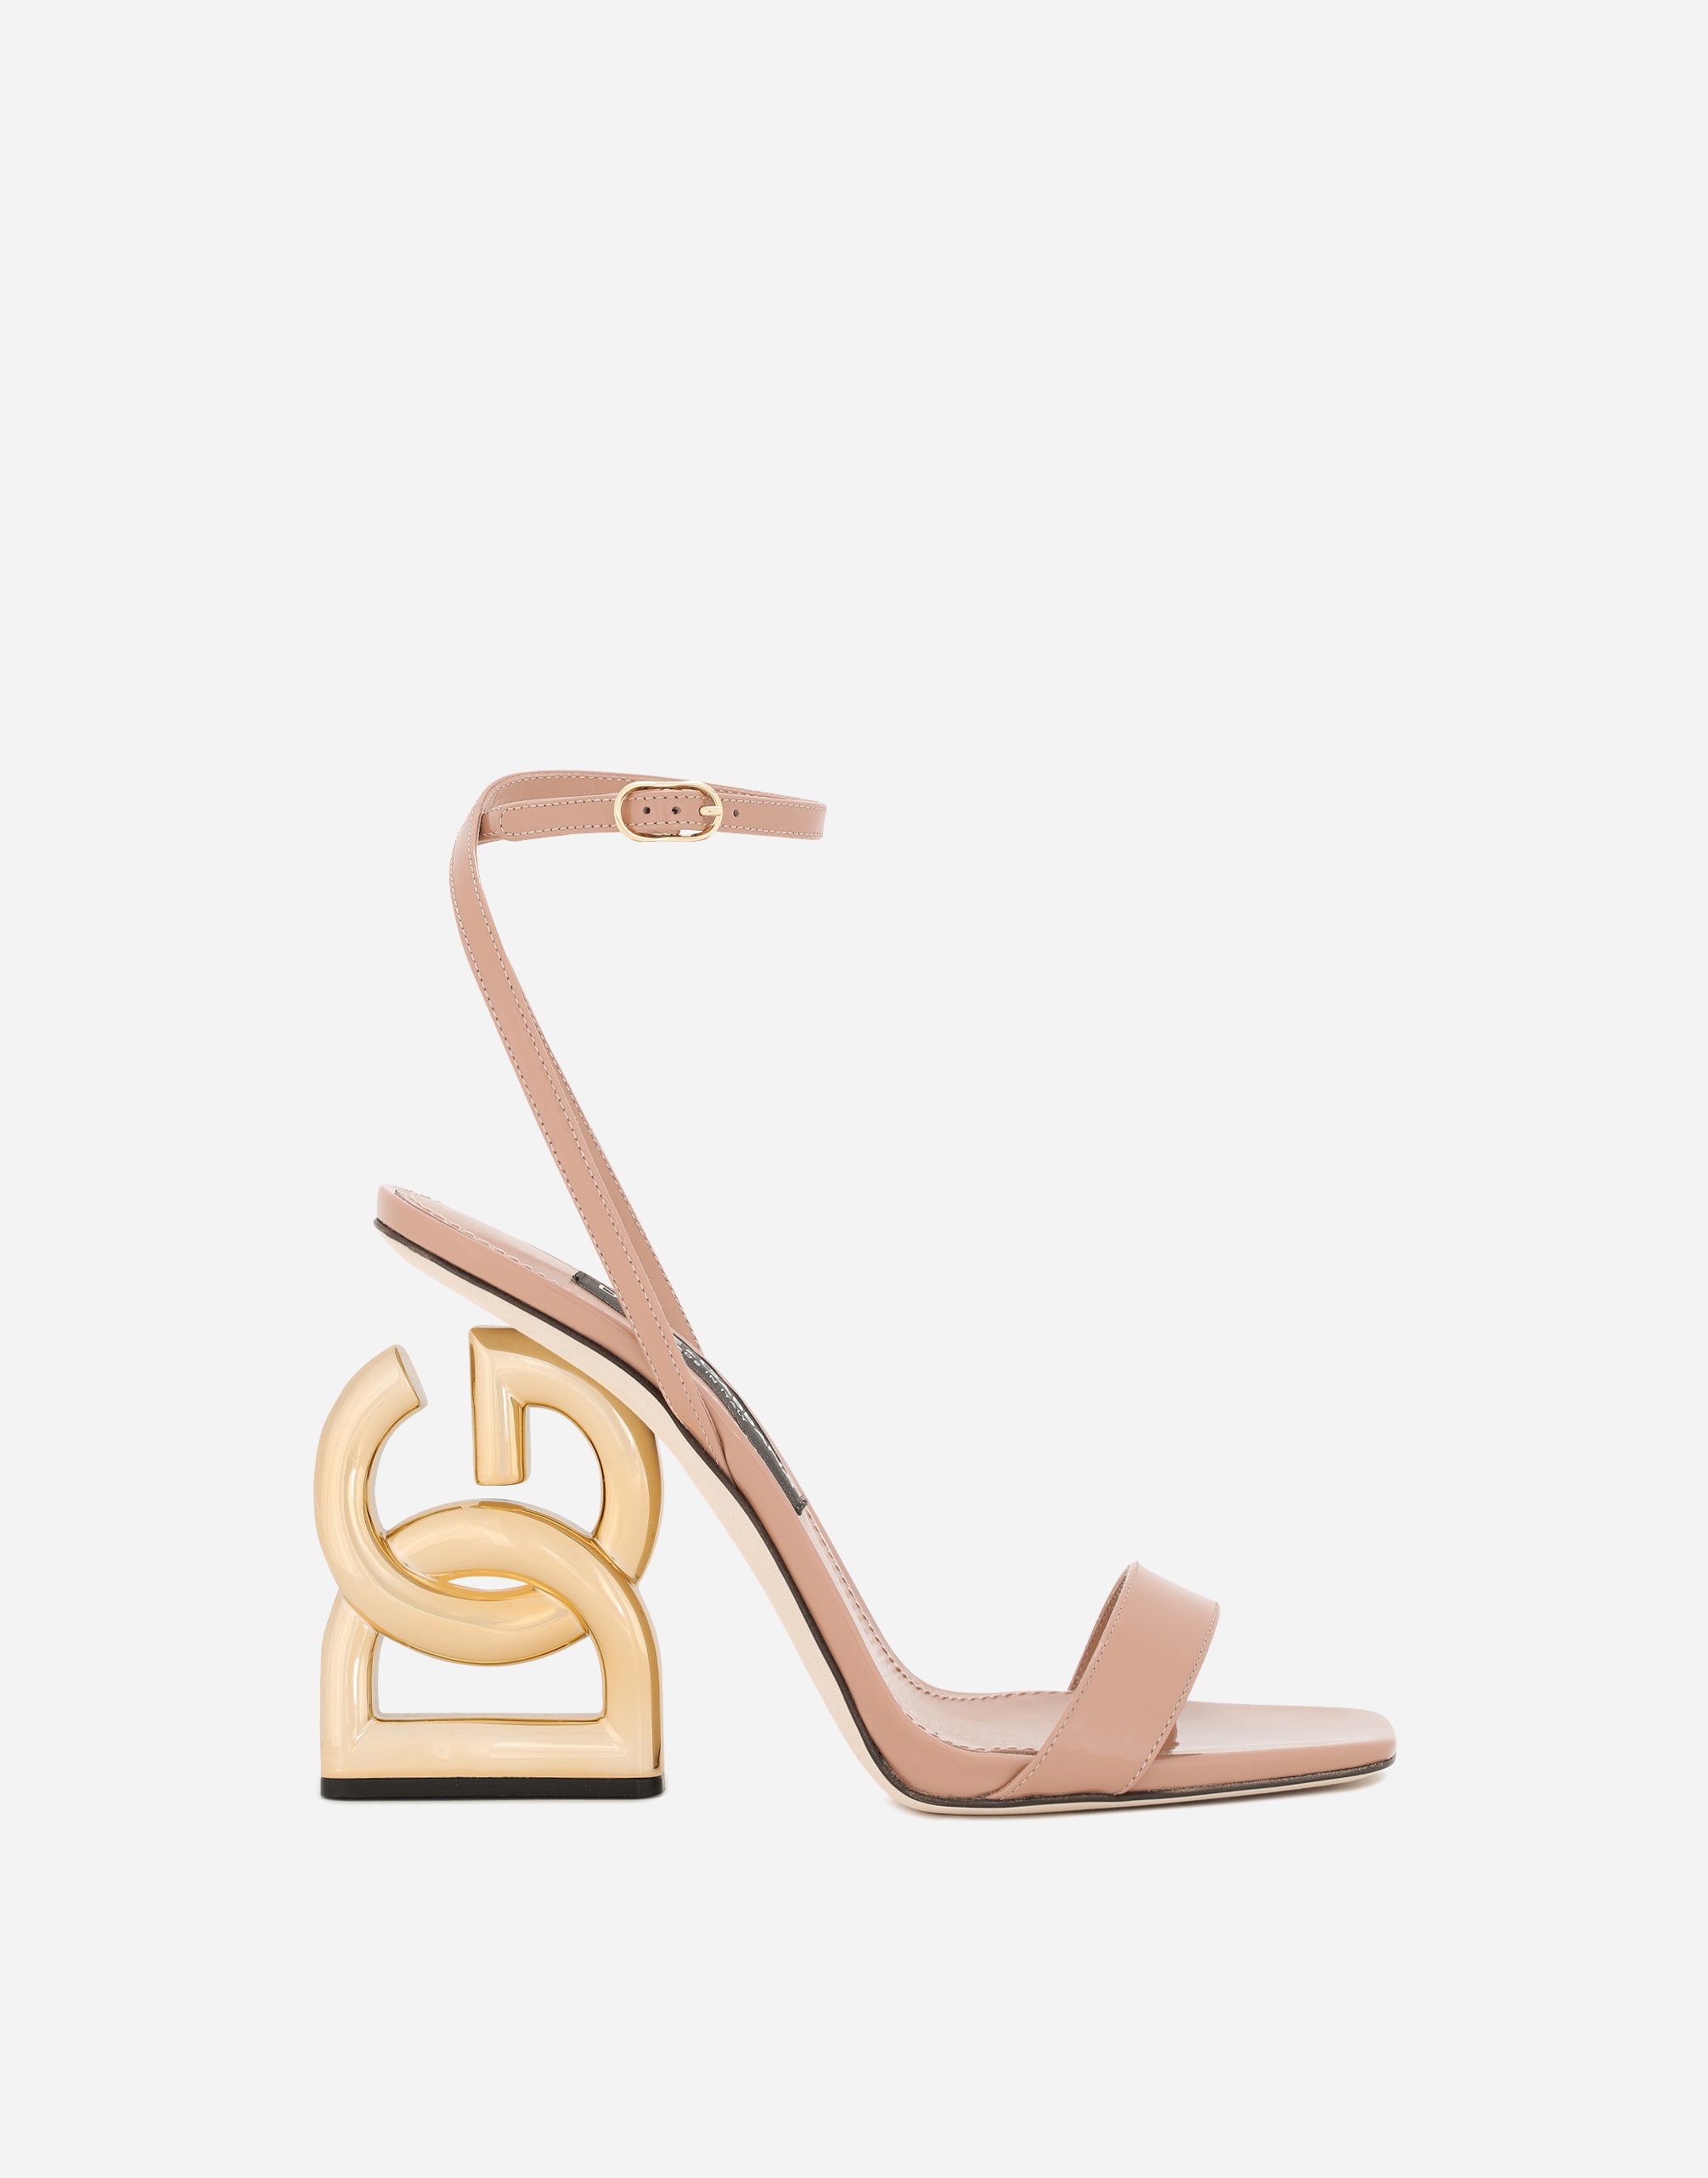 Patent leather sandals with 3.5 heel in Beige